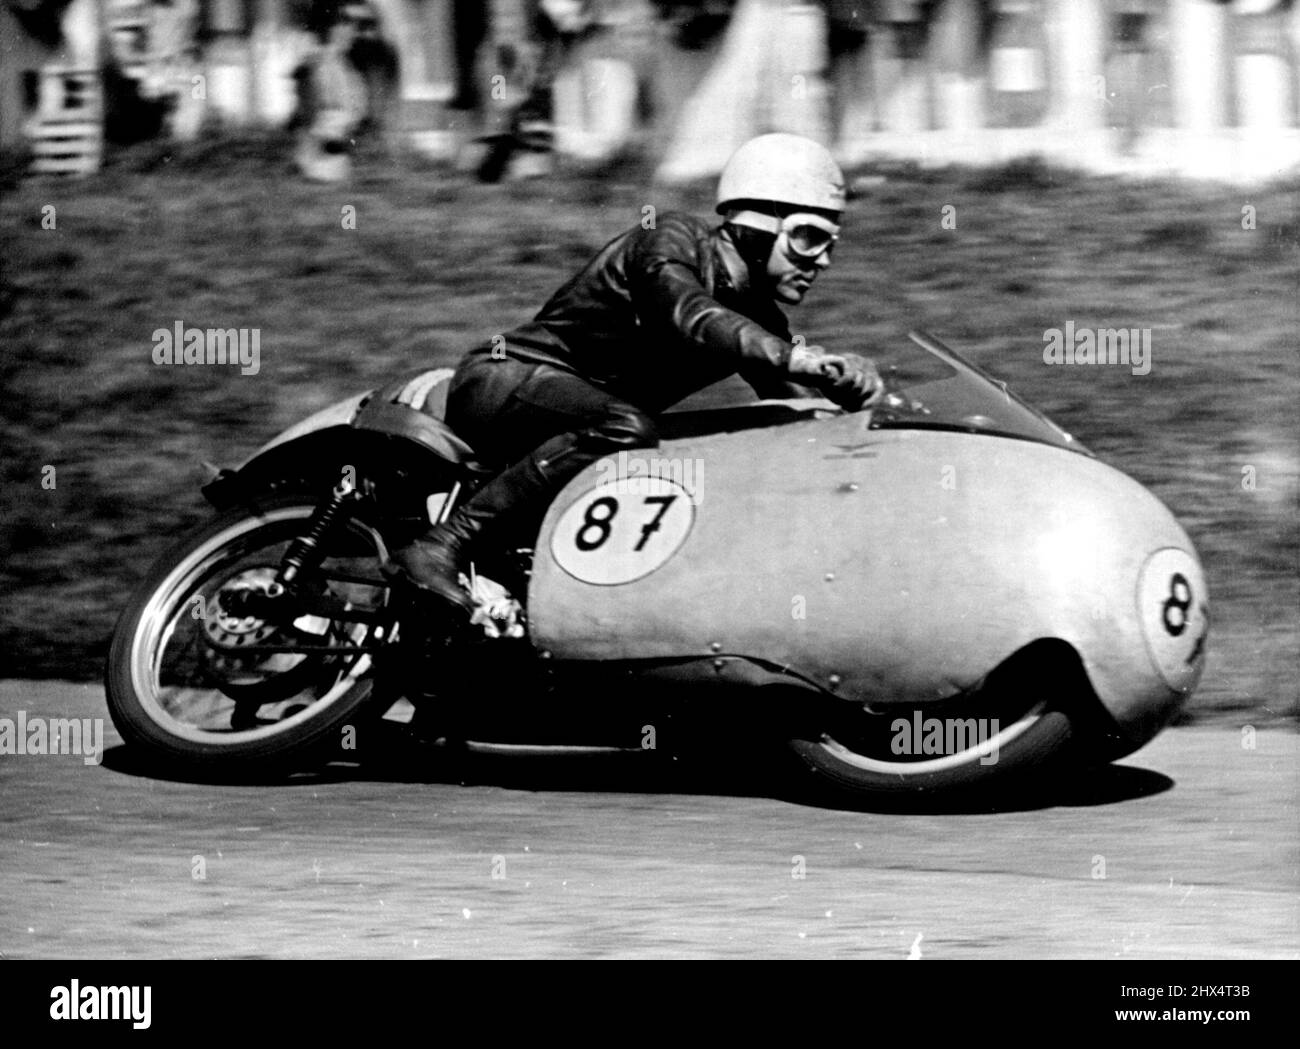 Duke Does It Again -- Australia's Ken Kavanagh at speed during the 350 CC Rave which he won on his Moto-Guzzi. Geoff Duke, Britains world 500 CC Motorcycle champion robe his 500 CC Gilera to Victory in the Rhine cup races at Hockenheim. Germany on Sunday. More than 120,000 fans saw him set up a lap record of 123.8. miles an hour, he covered the 20 laps in 47 minutes 12.5. seconds. Ken Kavanagh of Australia was second in this event and also won the 350 CC race on his Moto-Guzzi at 11.84 miles an Hour. May 10, 1955. (Photo by Paul Popper Photo, Paul Popper Ltd.). Stock Photo